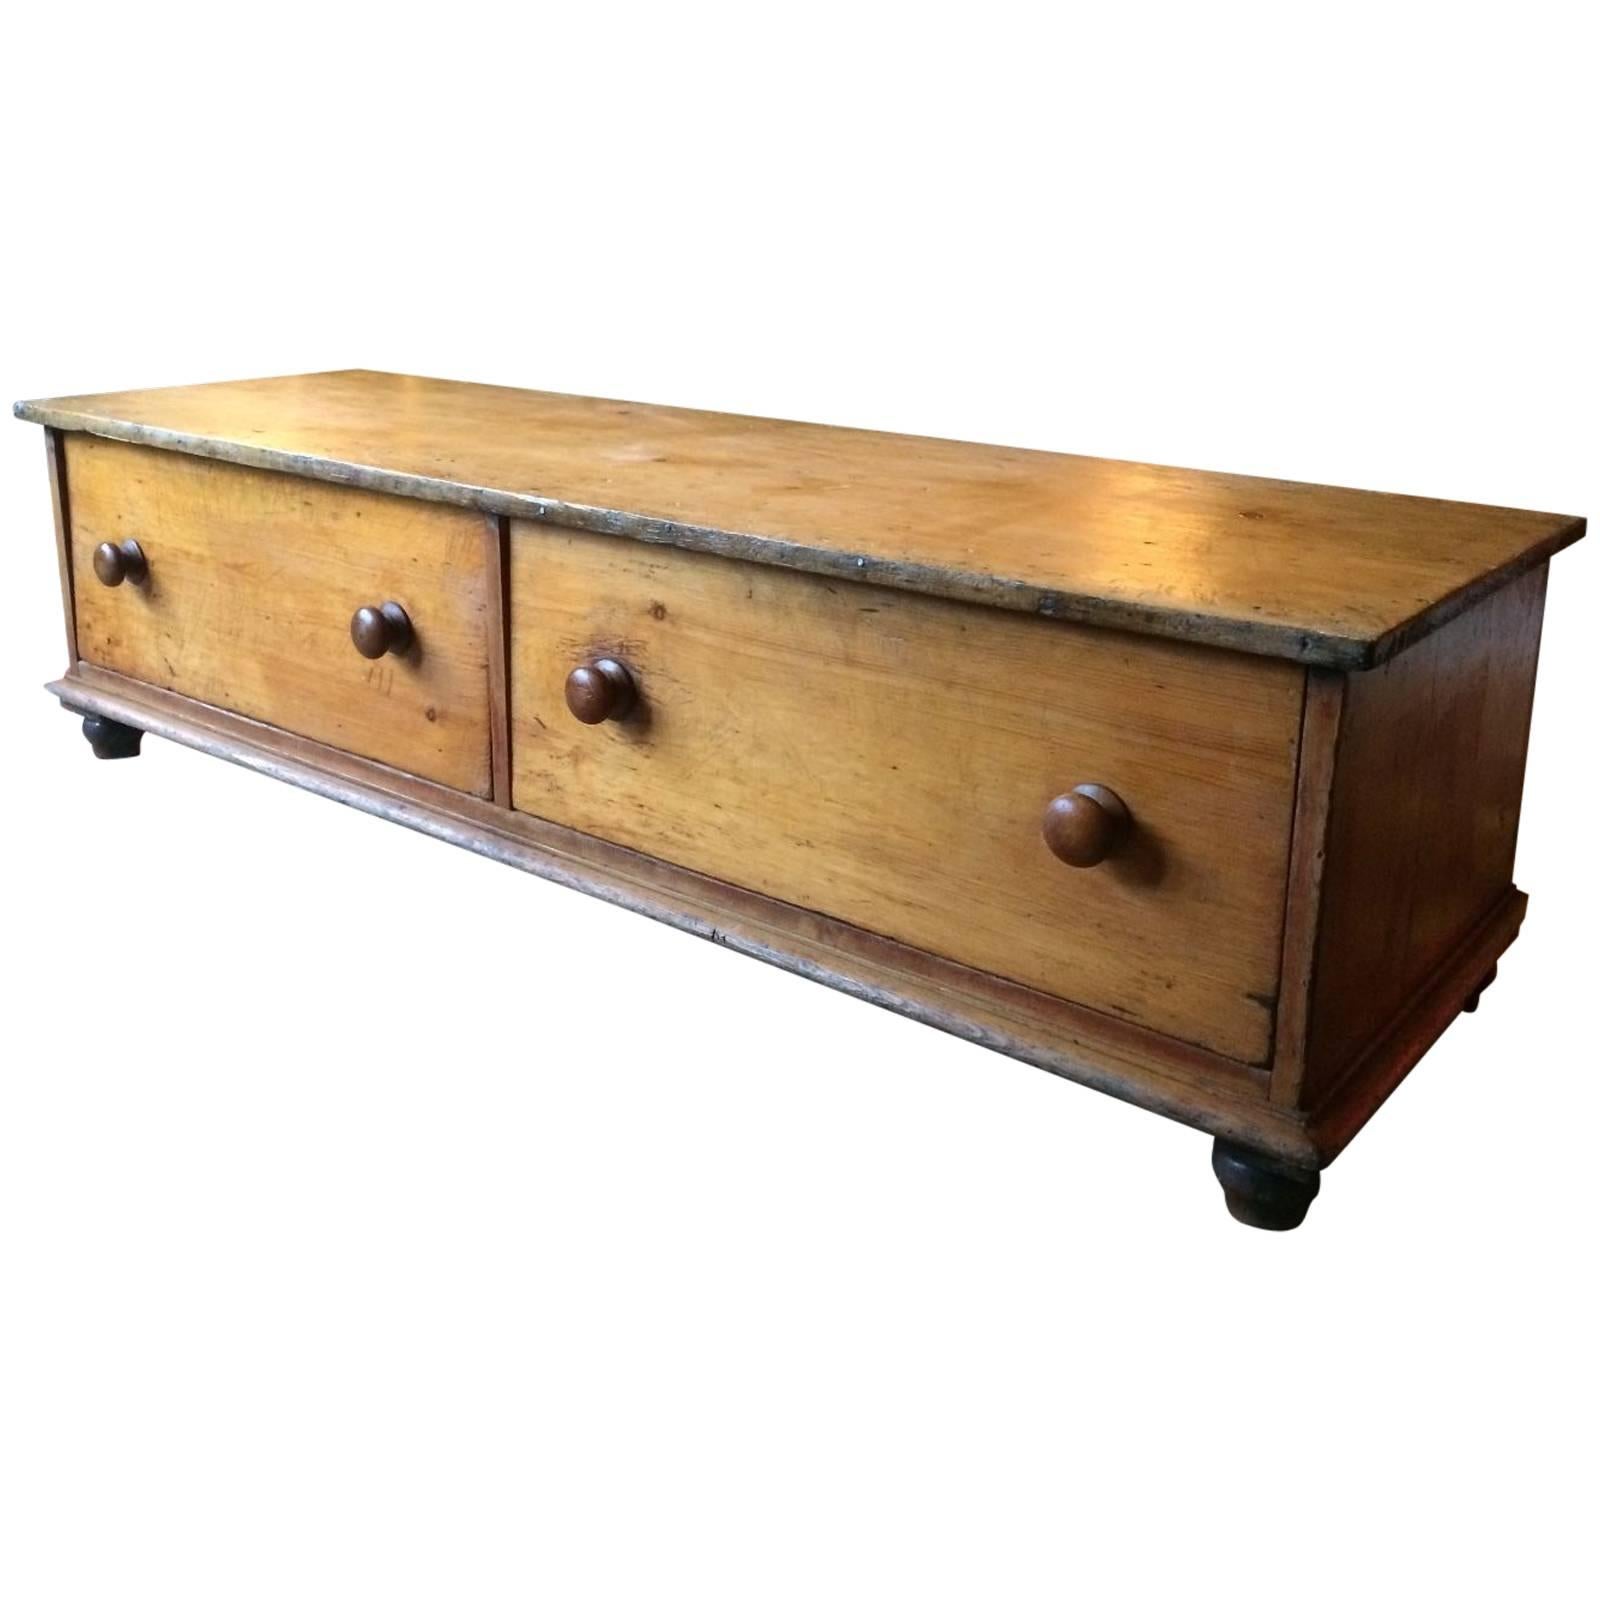 Antique Chest of Drawers Dresser Coffee Table, Victorian, 19th Century